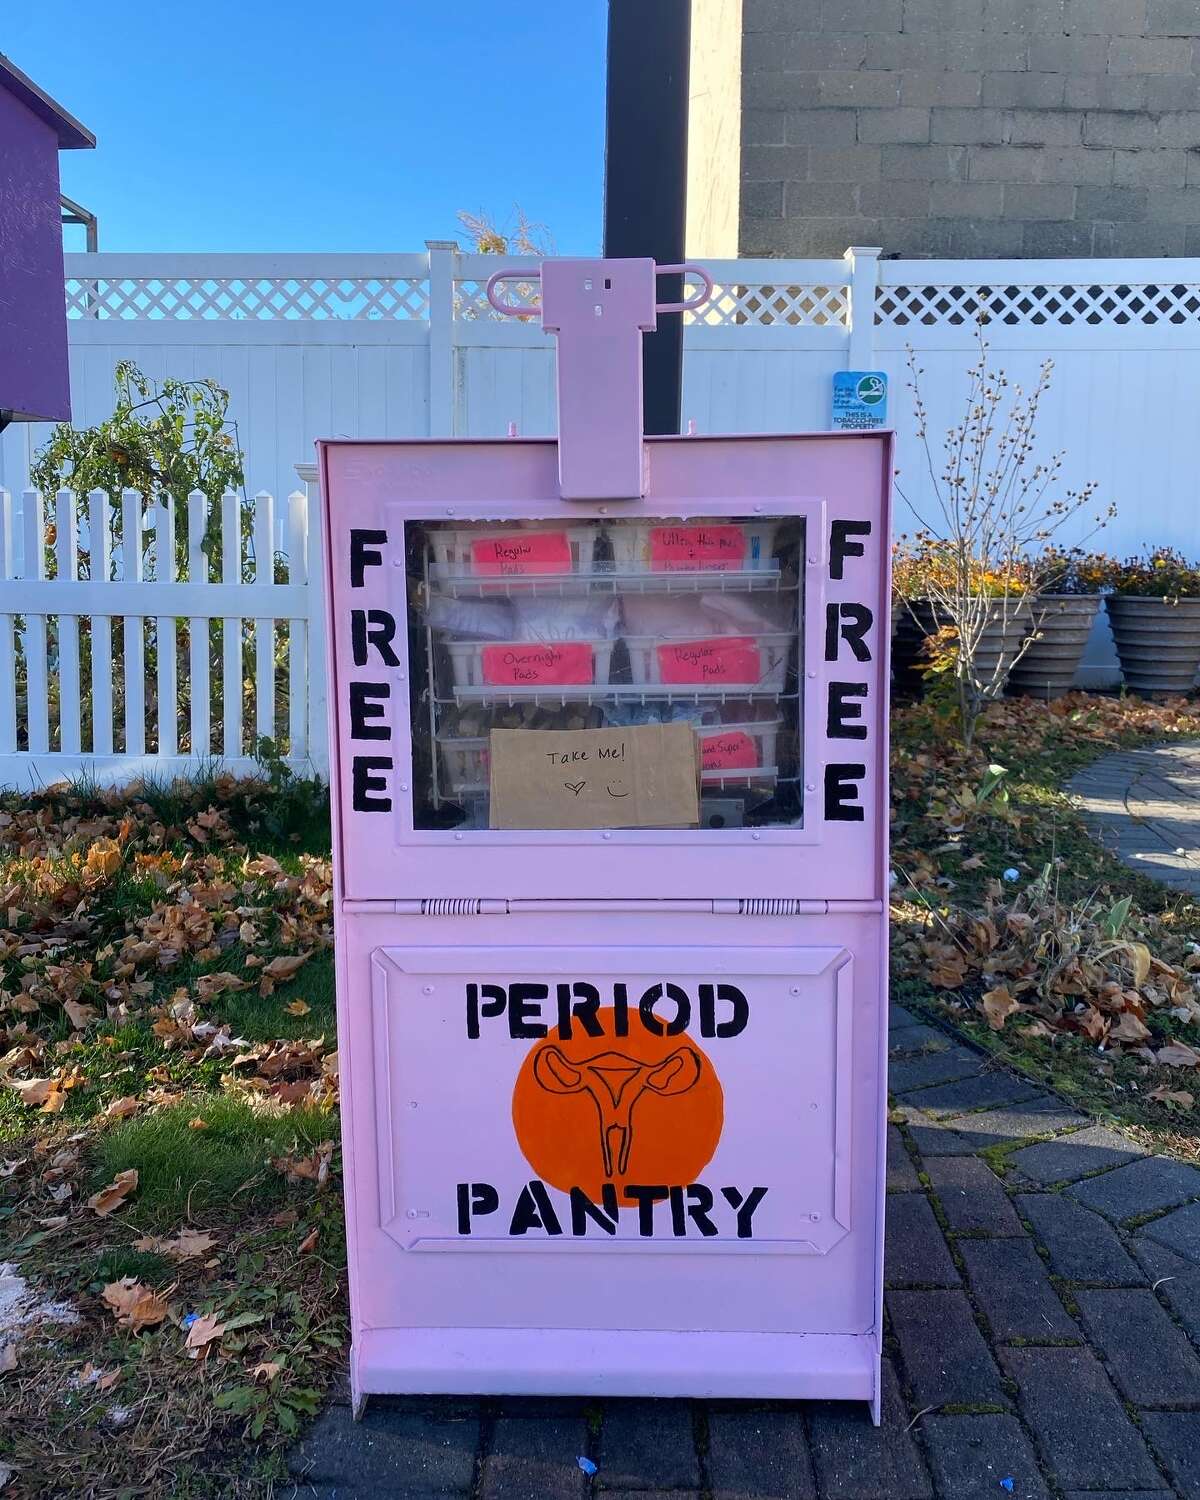 Schenectady Menstrual Health Coalition installed its first Period Pantry on Nov. 9, 2022 at the Bethesda House in Schenectady, N.Y. The pantry provides 24/7 access to free pads, tampons and panty liners with brown bags to carry the products. The coalition will soon include menstrual cups and period underwear in its pantries. (Provided by Schenectady Menstrual Health Coalition)